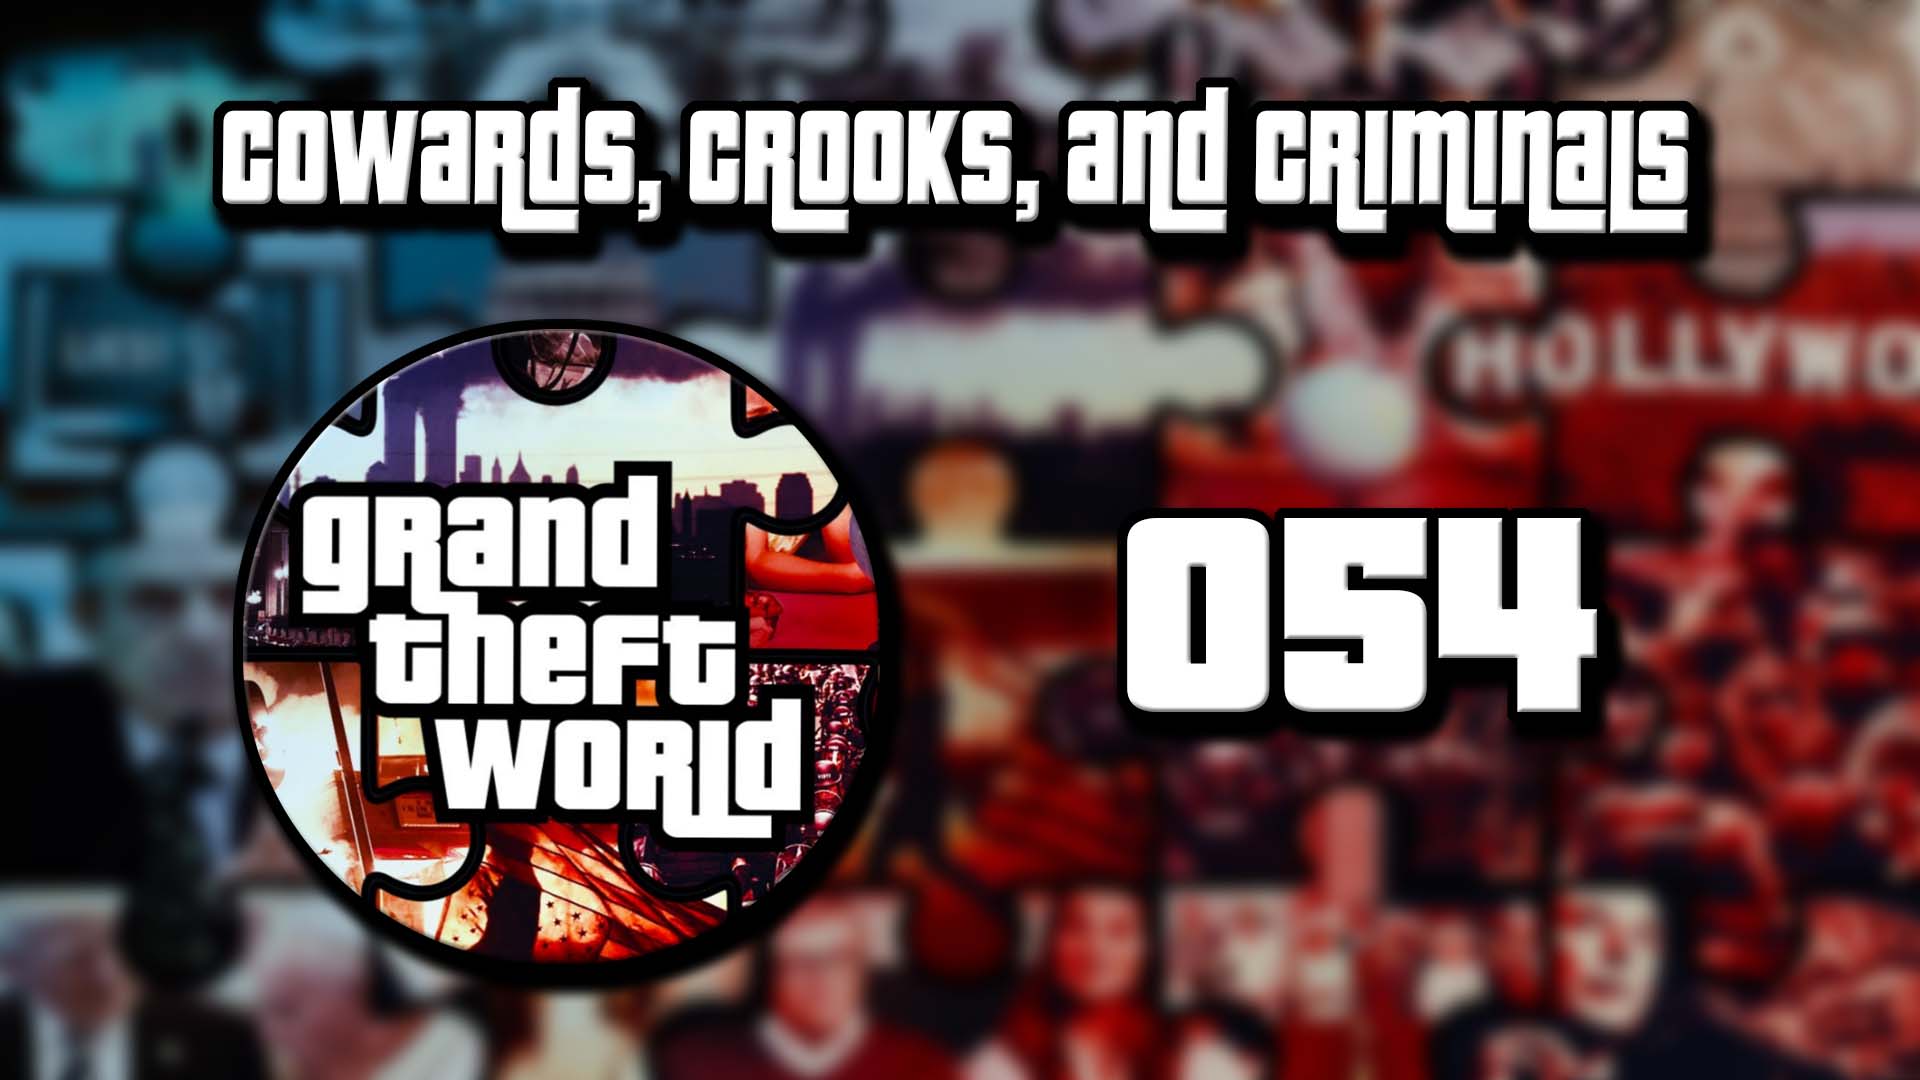 Grand Theft World Podcast 054 | Cowards, Crooks, and Criminals